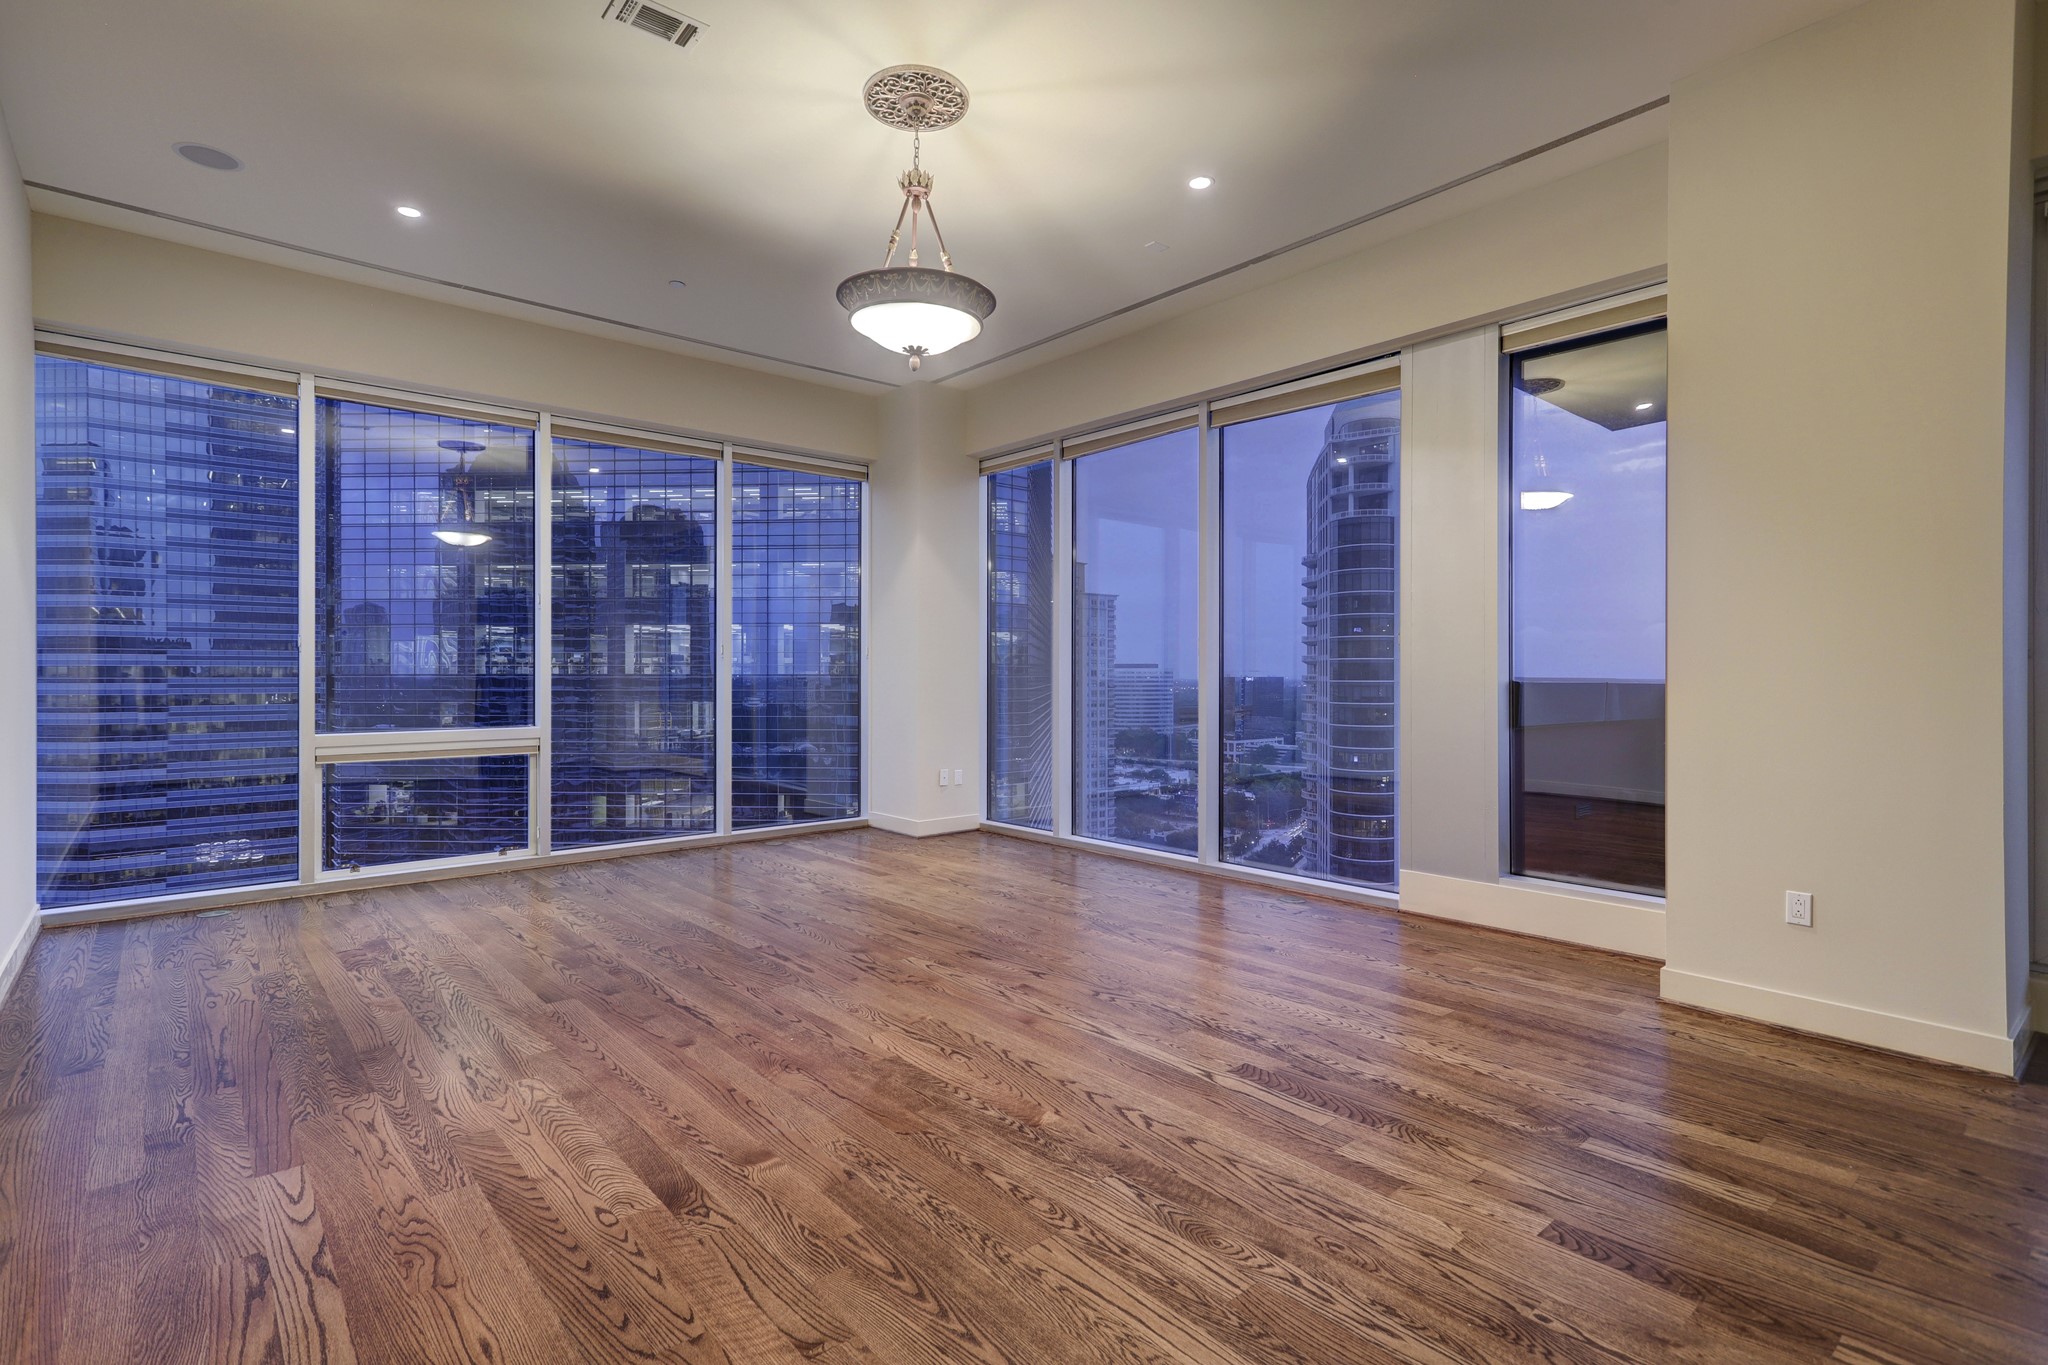 The private Primary Suite [24 x 18] features refinished hardwood floors, wraparound floor-to-ceiling windows bringing in Downtown and Memorial Park views. Direct access to the covered and turfed balcony. A home office is located just off the Primary.